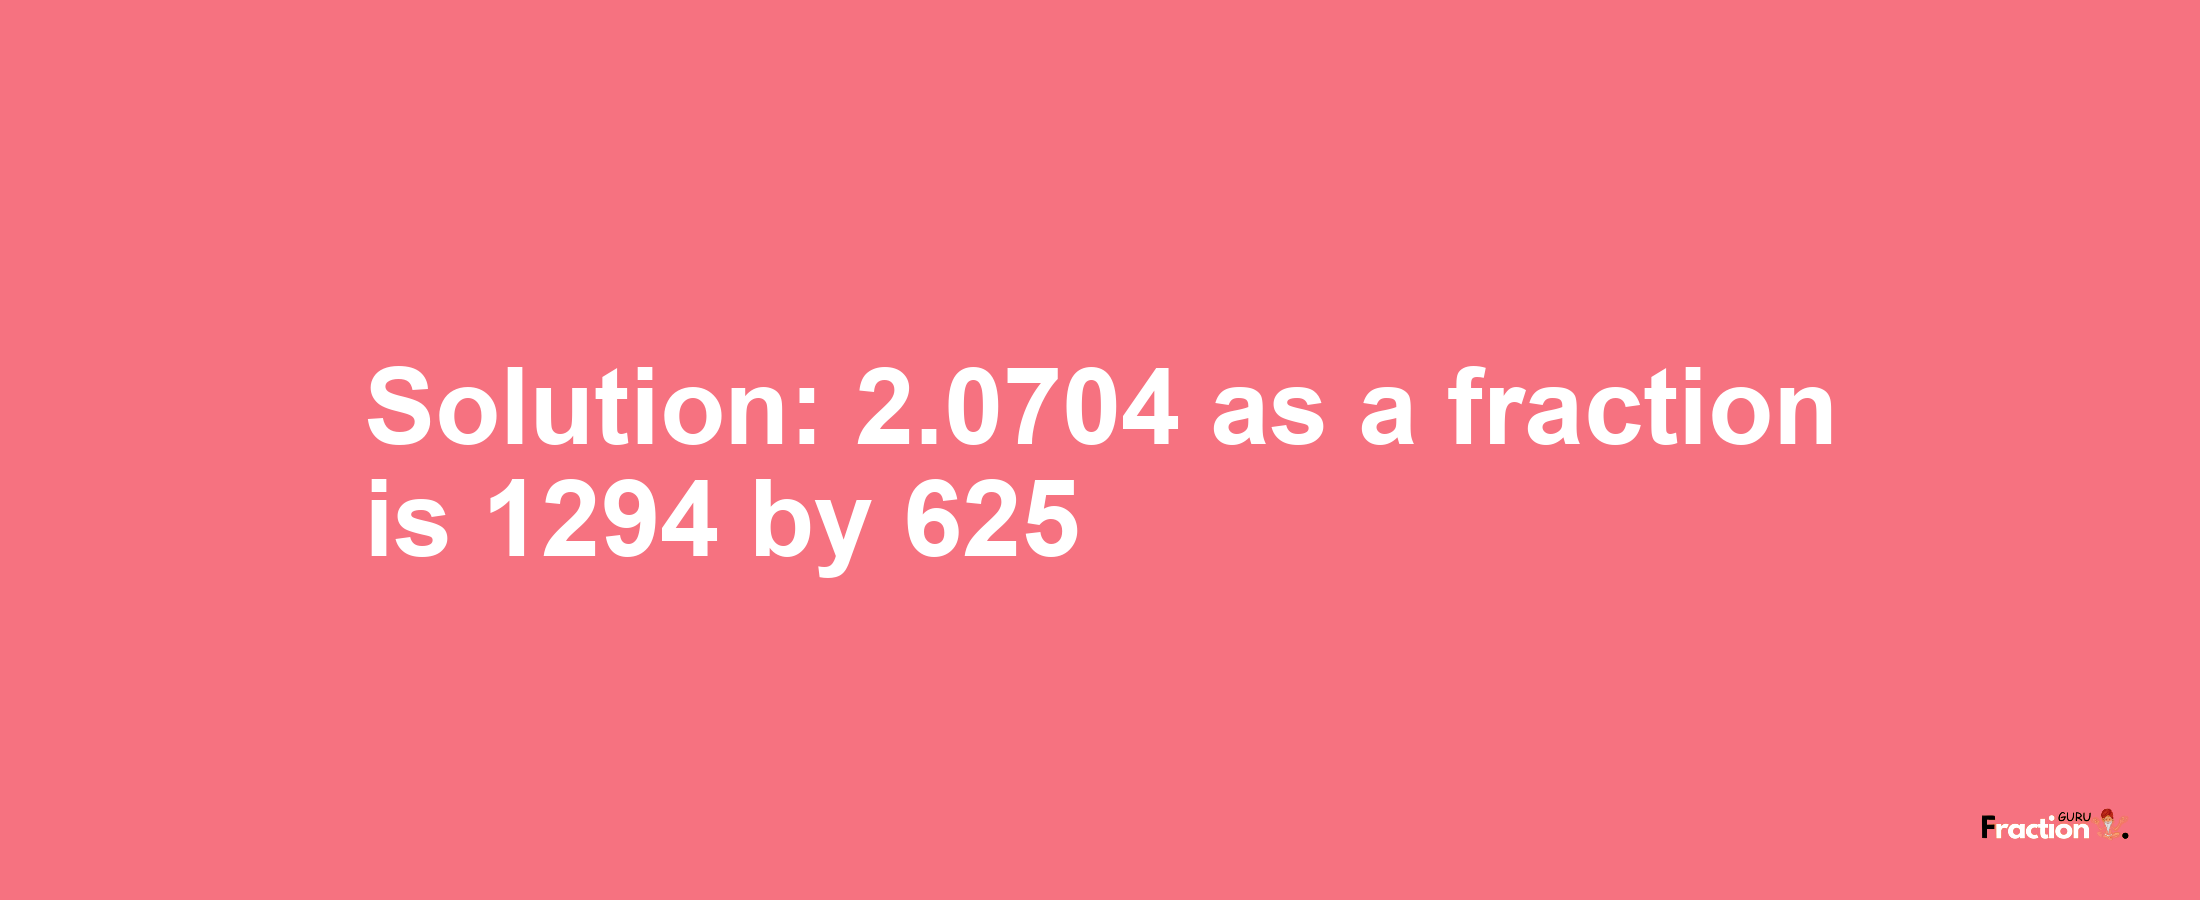 Solution:2.0704 as a fraction is 1294/625